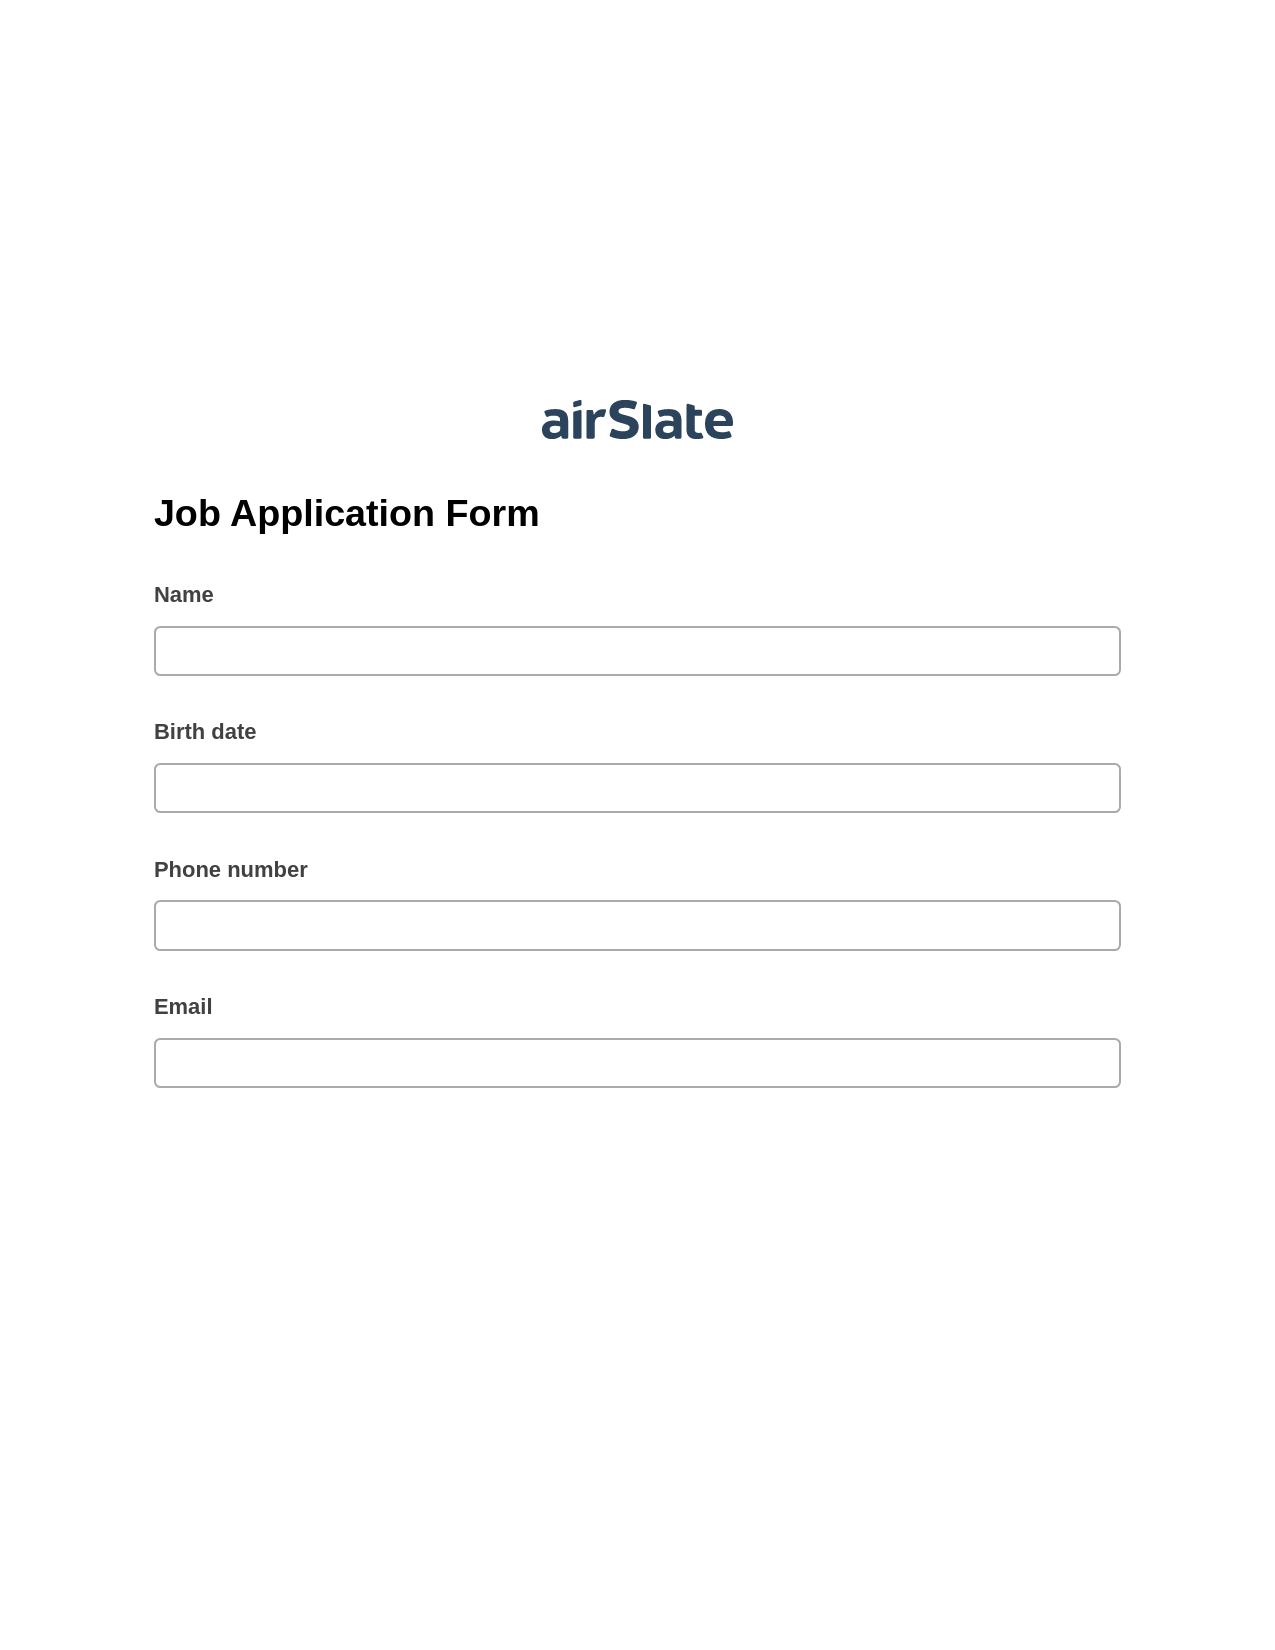 Multirole Job Application Form Pre-fill from Google Sheets Bot, Create NetSuite Records Bot, Export to MySQL Bot